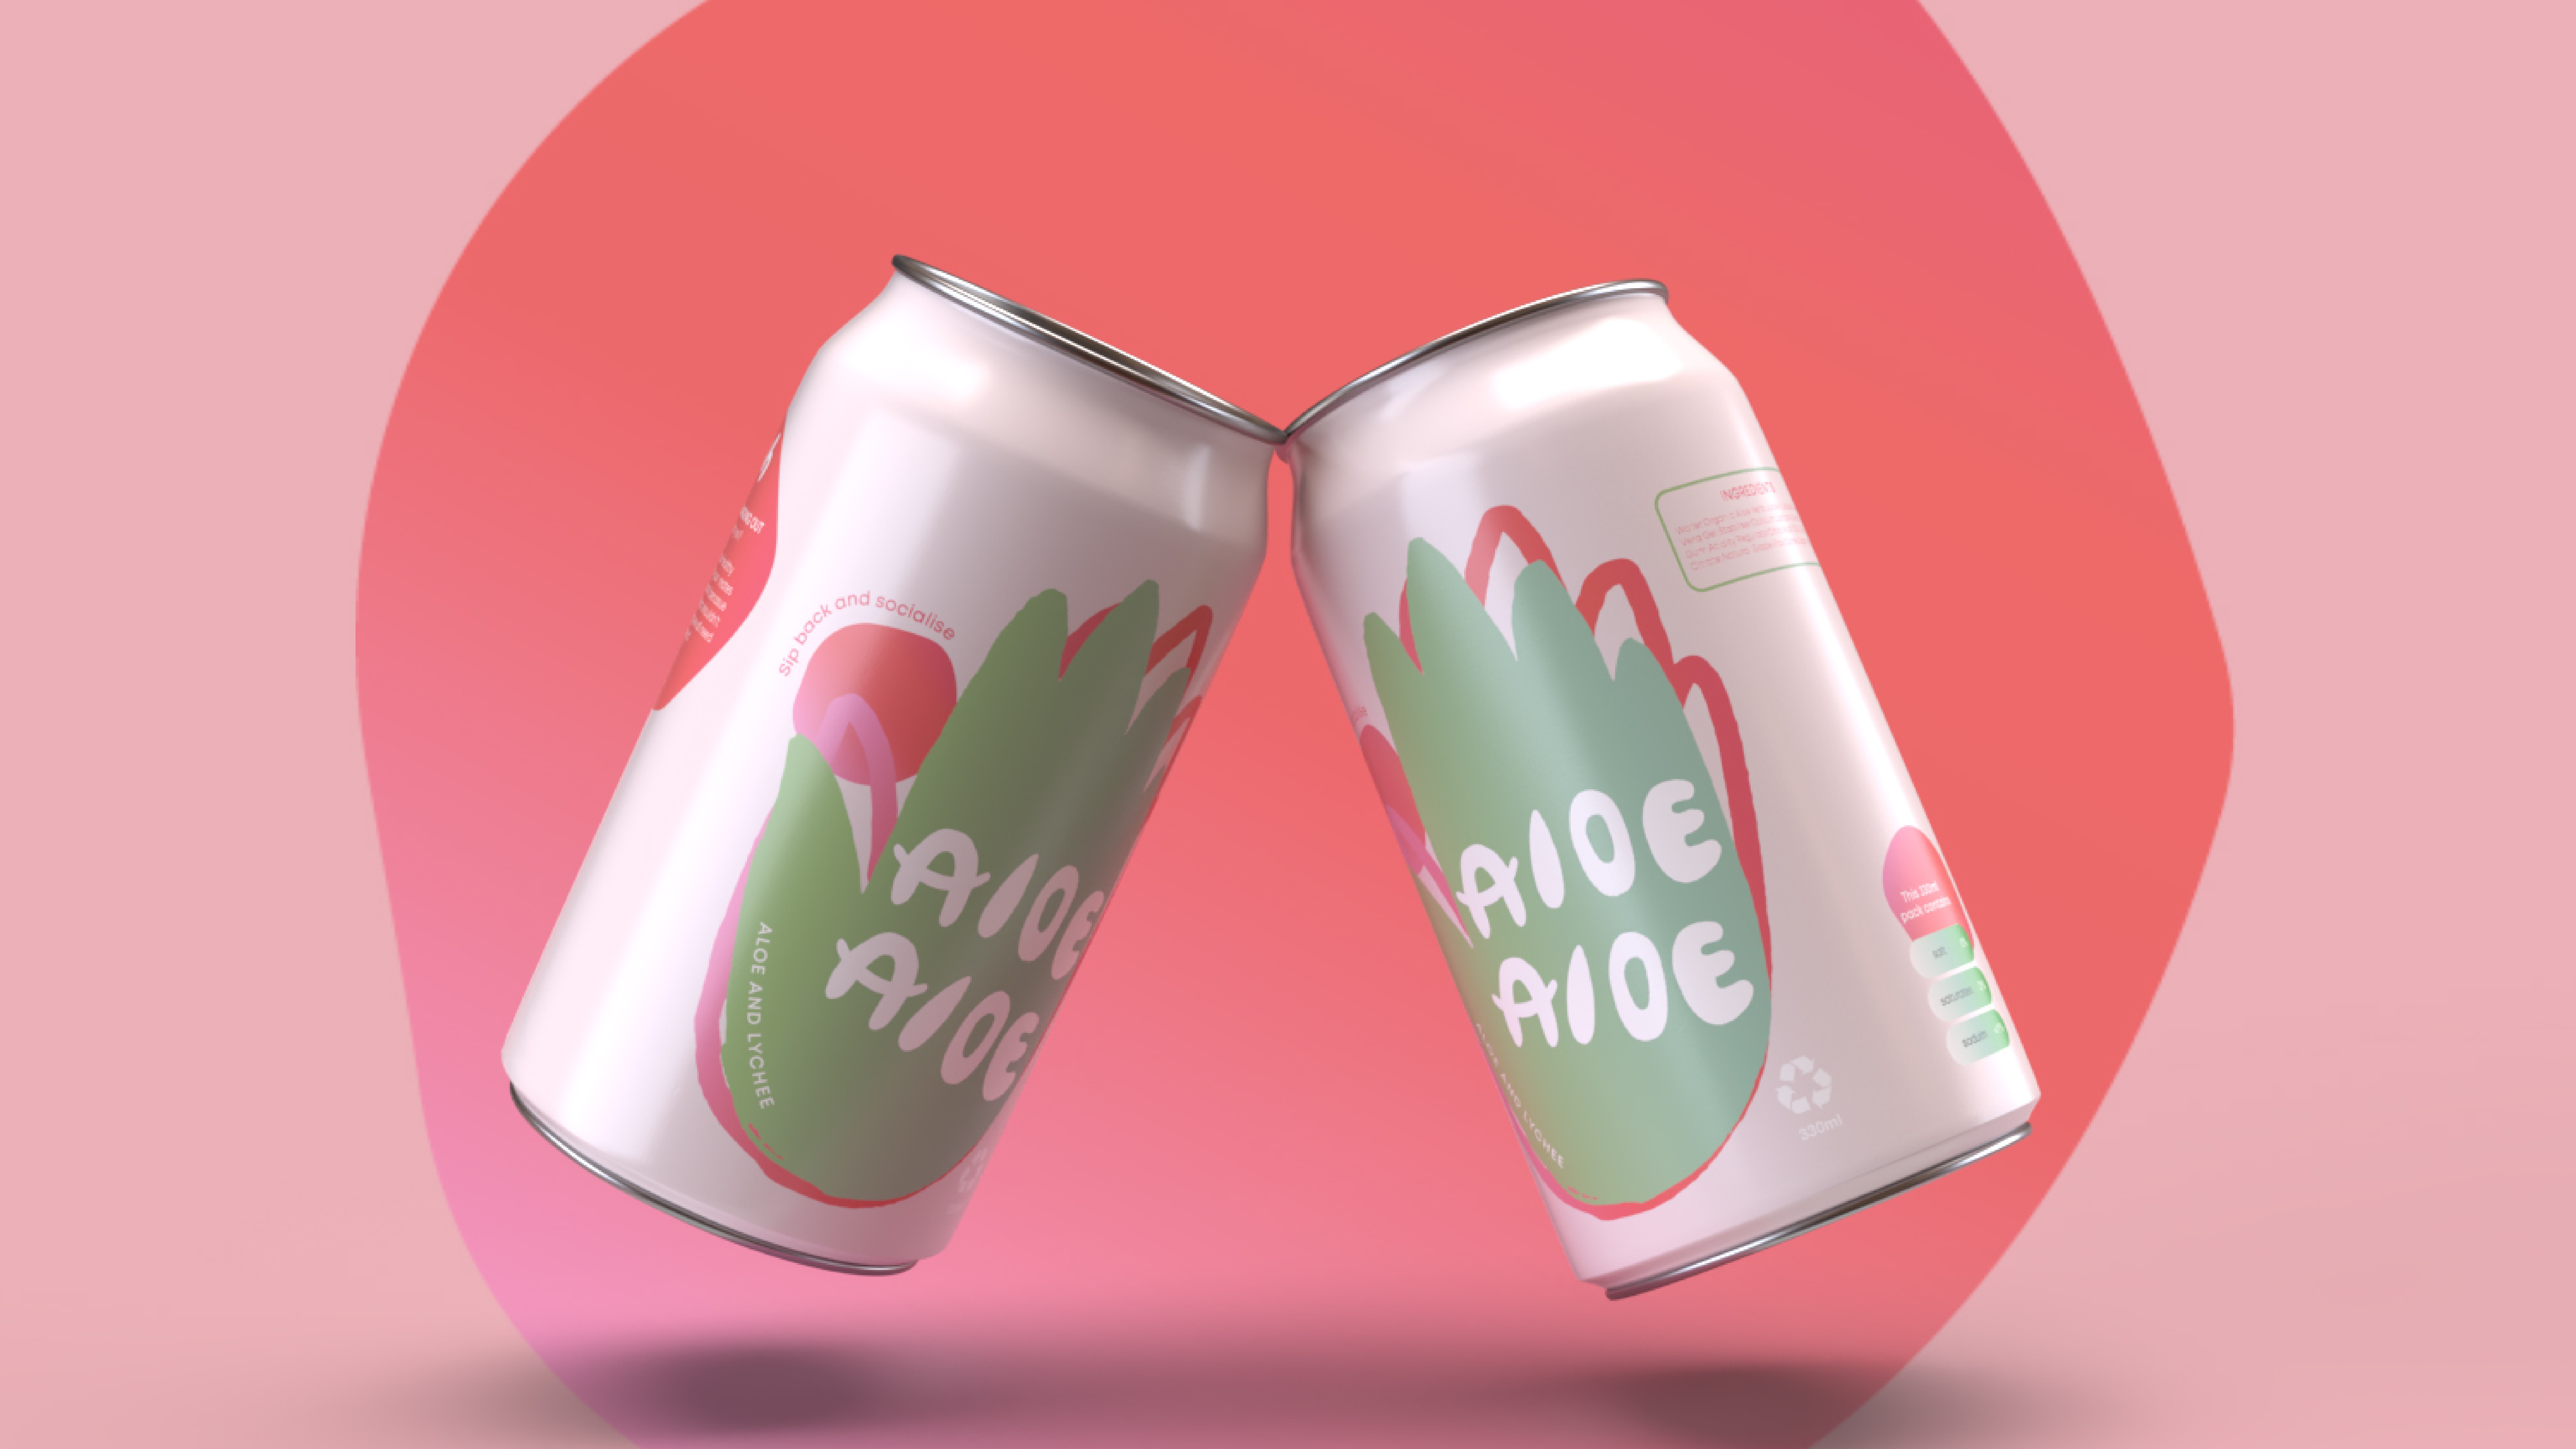 BA Graphic design work by Aemelia Rose Turton showing two wellness cans clinking.